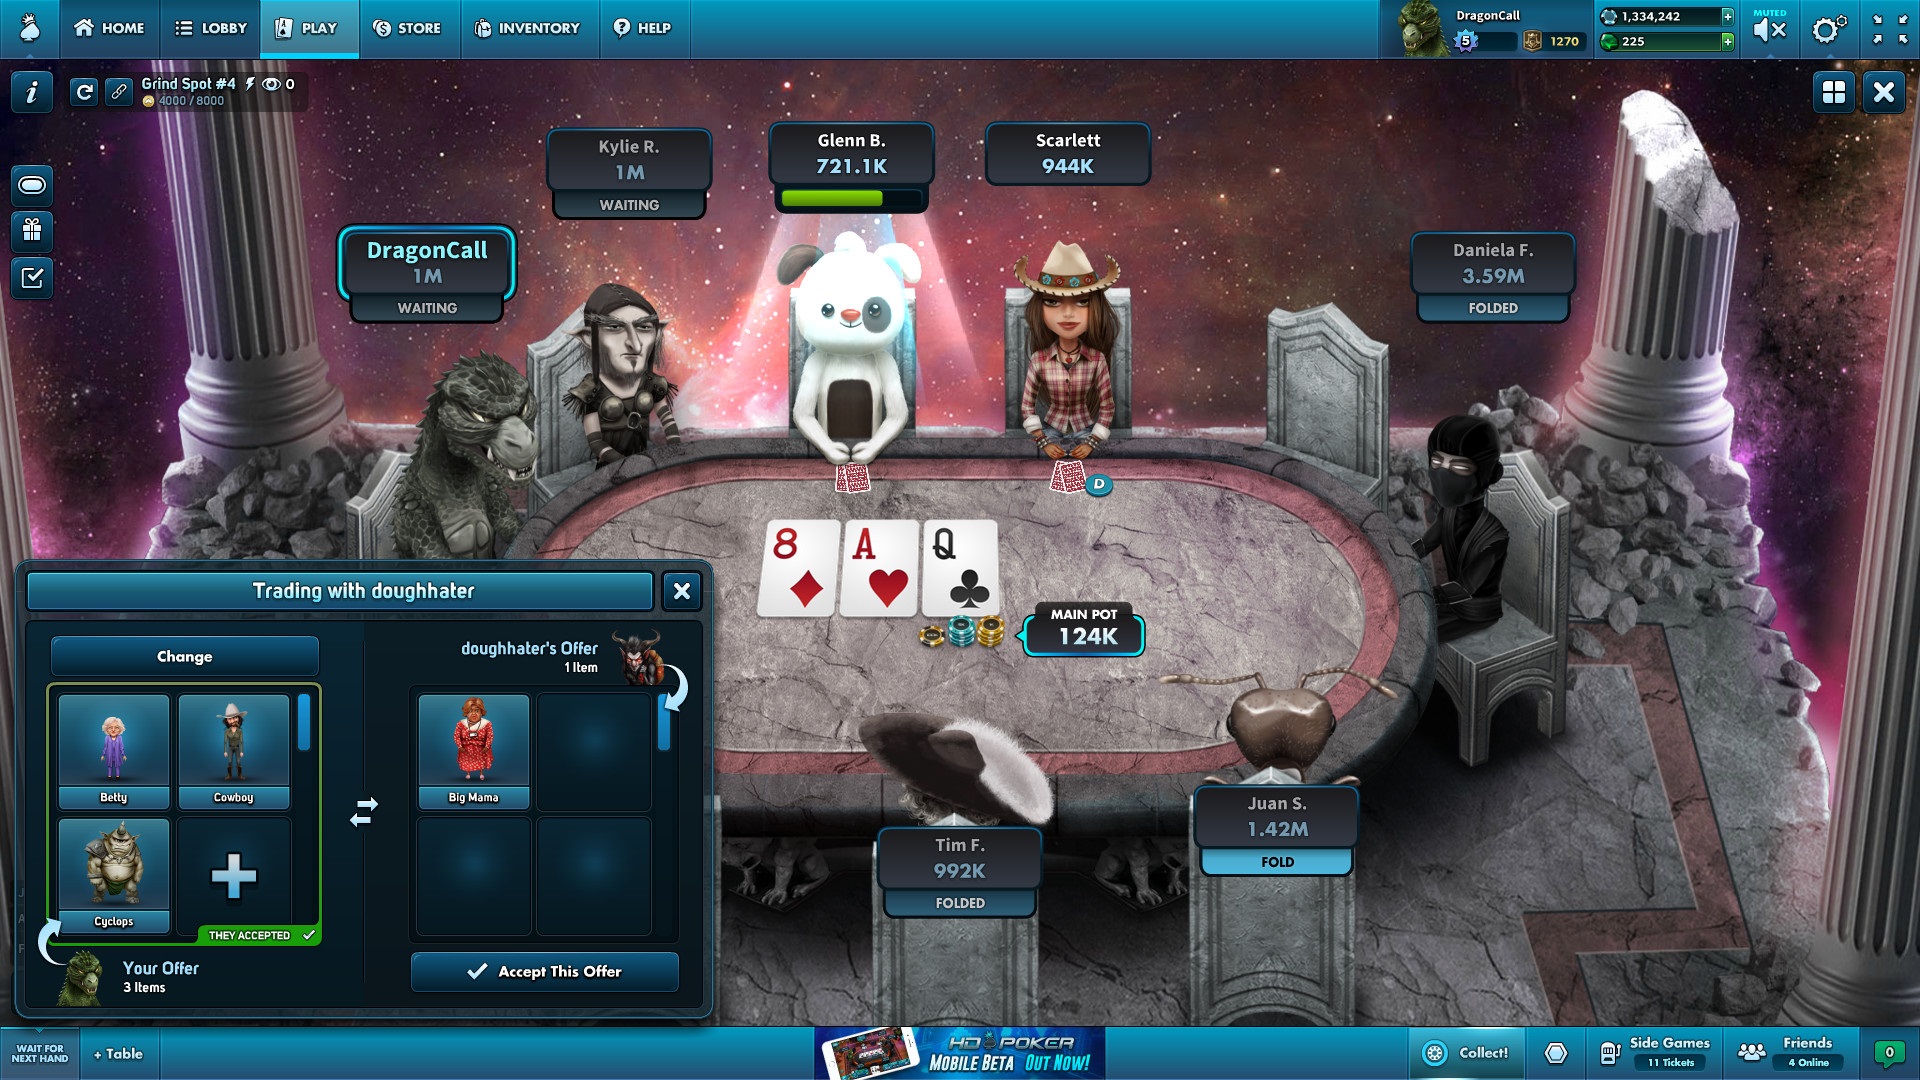 Chatting through online is possible using LiveChat poker 99